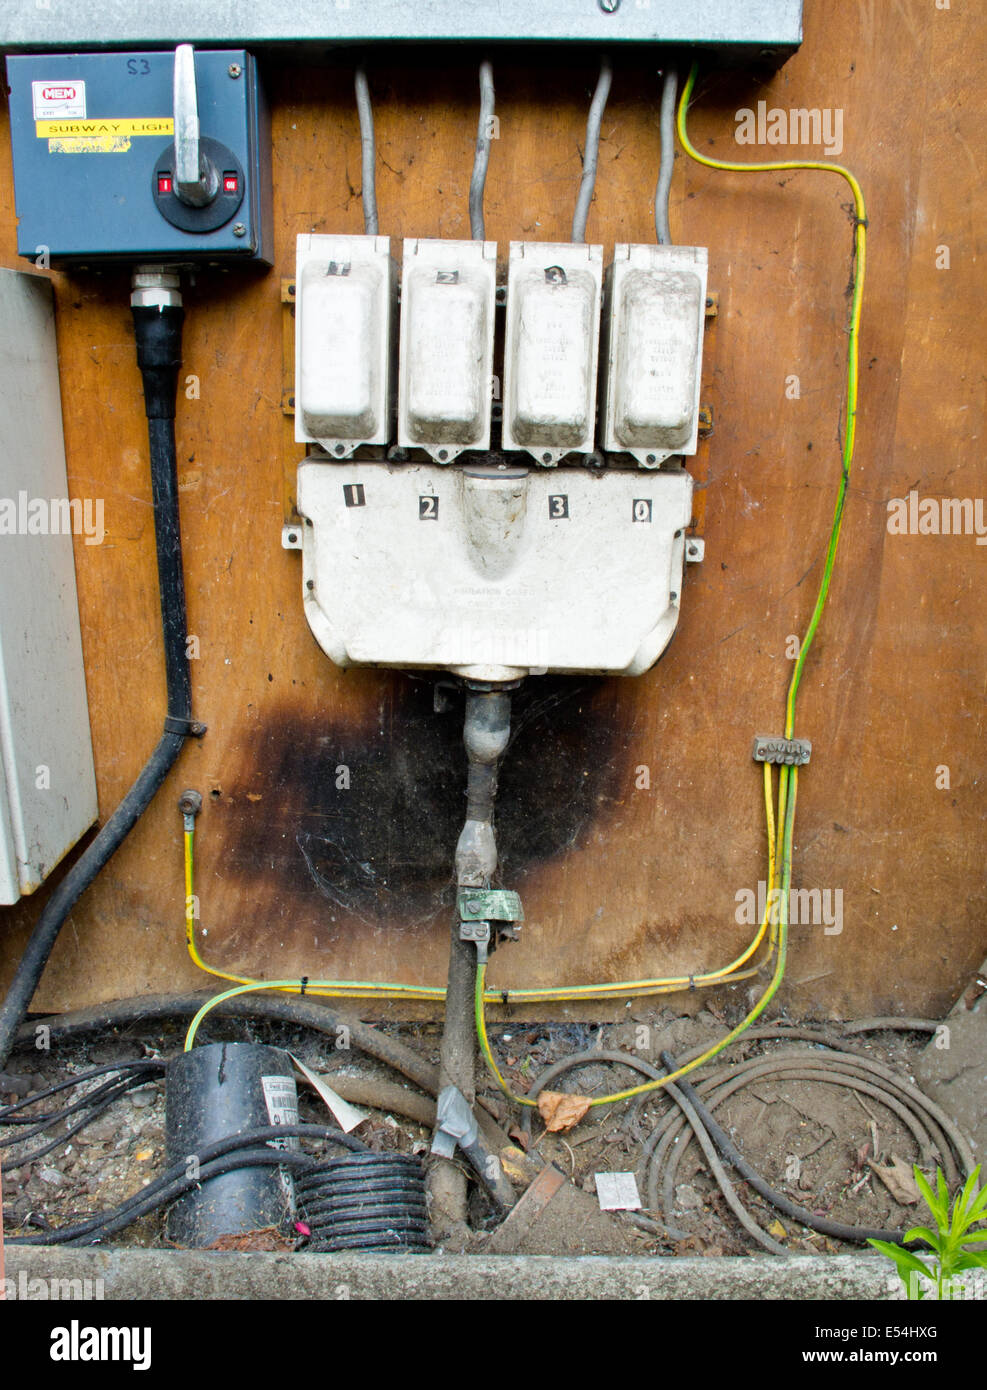 some old electrical switchgear Stock Photo